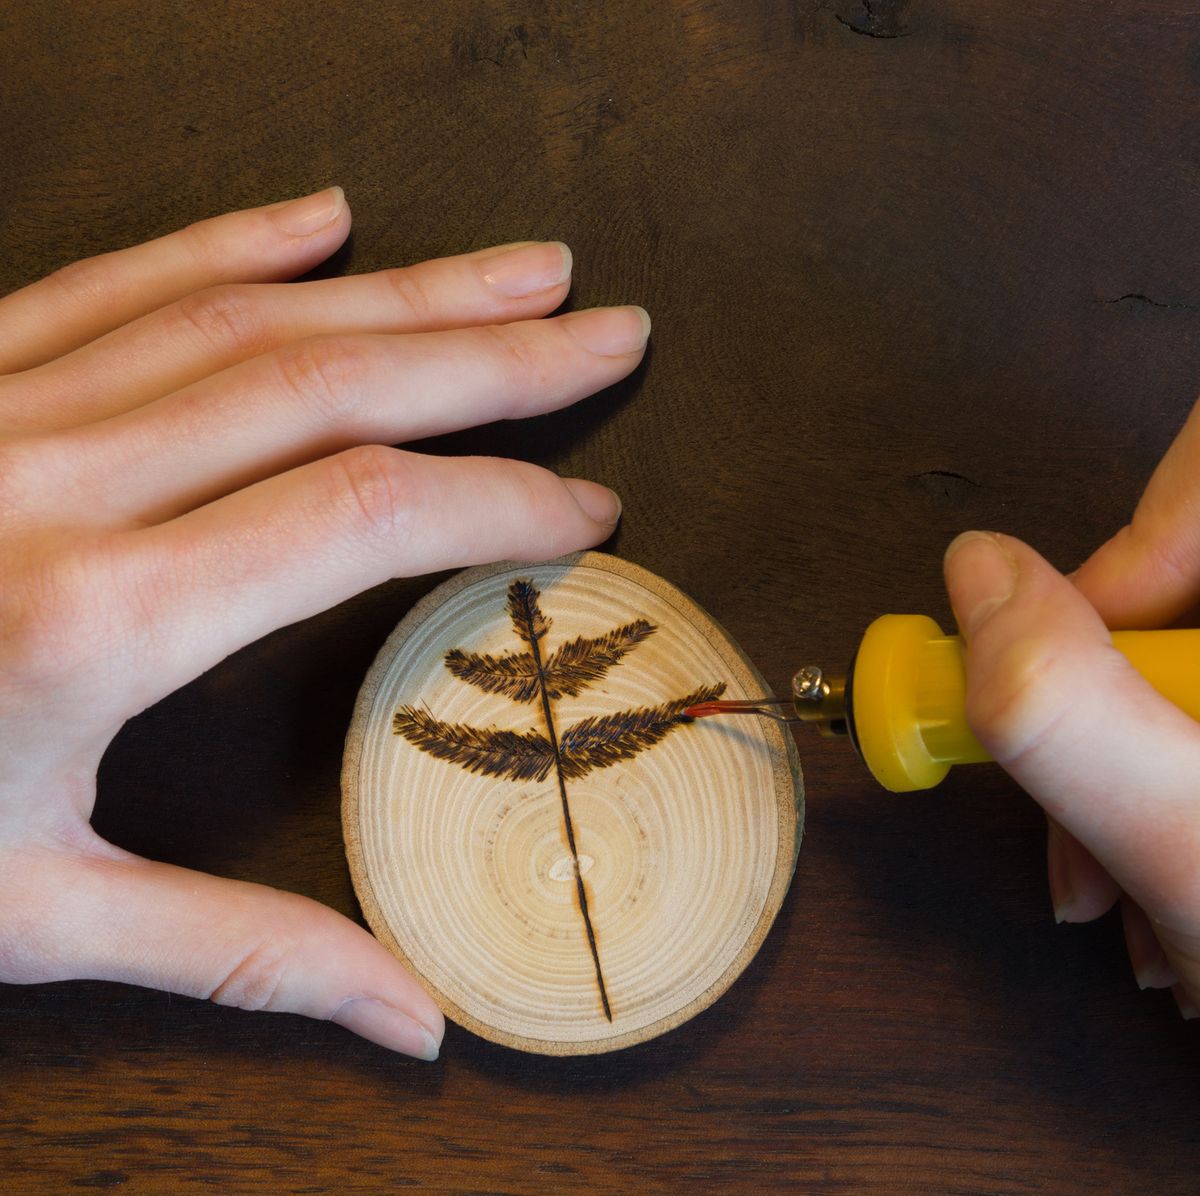 What is Wood Burning + A Practical Project for Beginners - Talk To The Hands